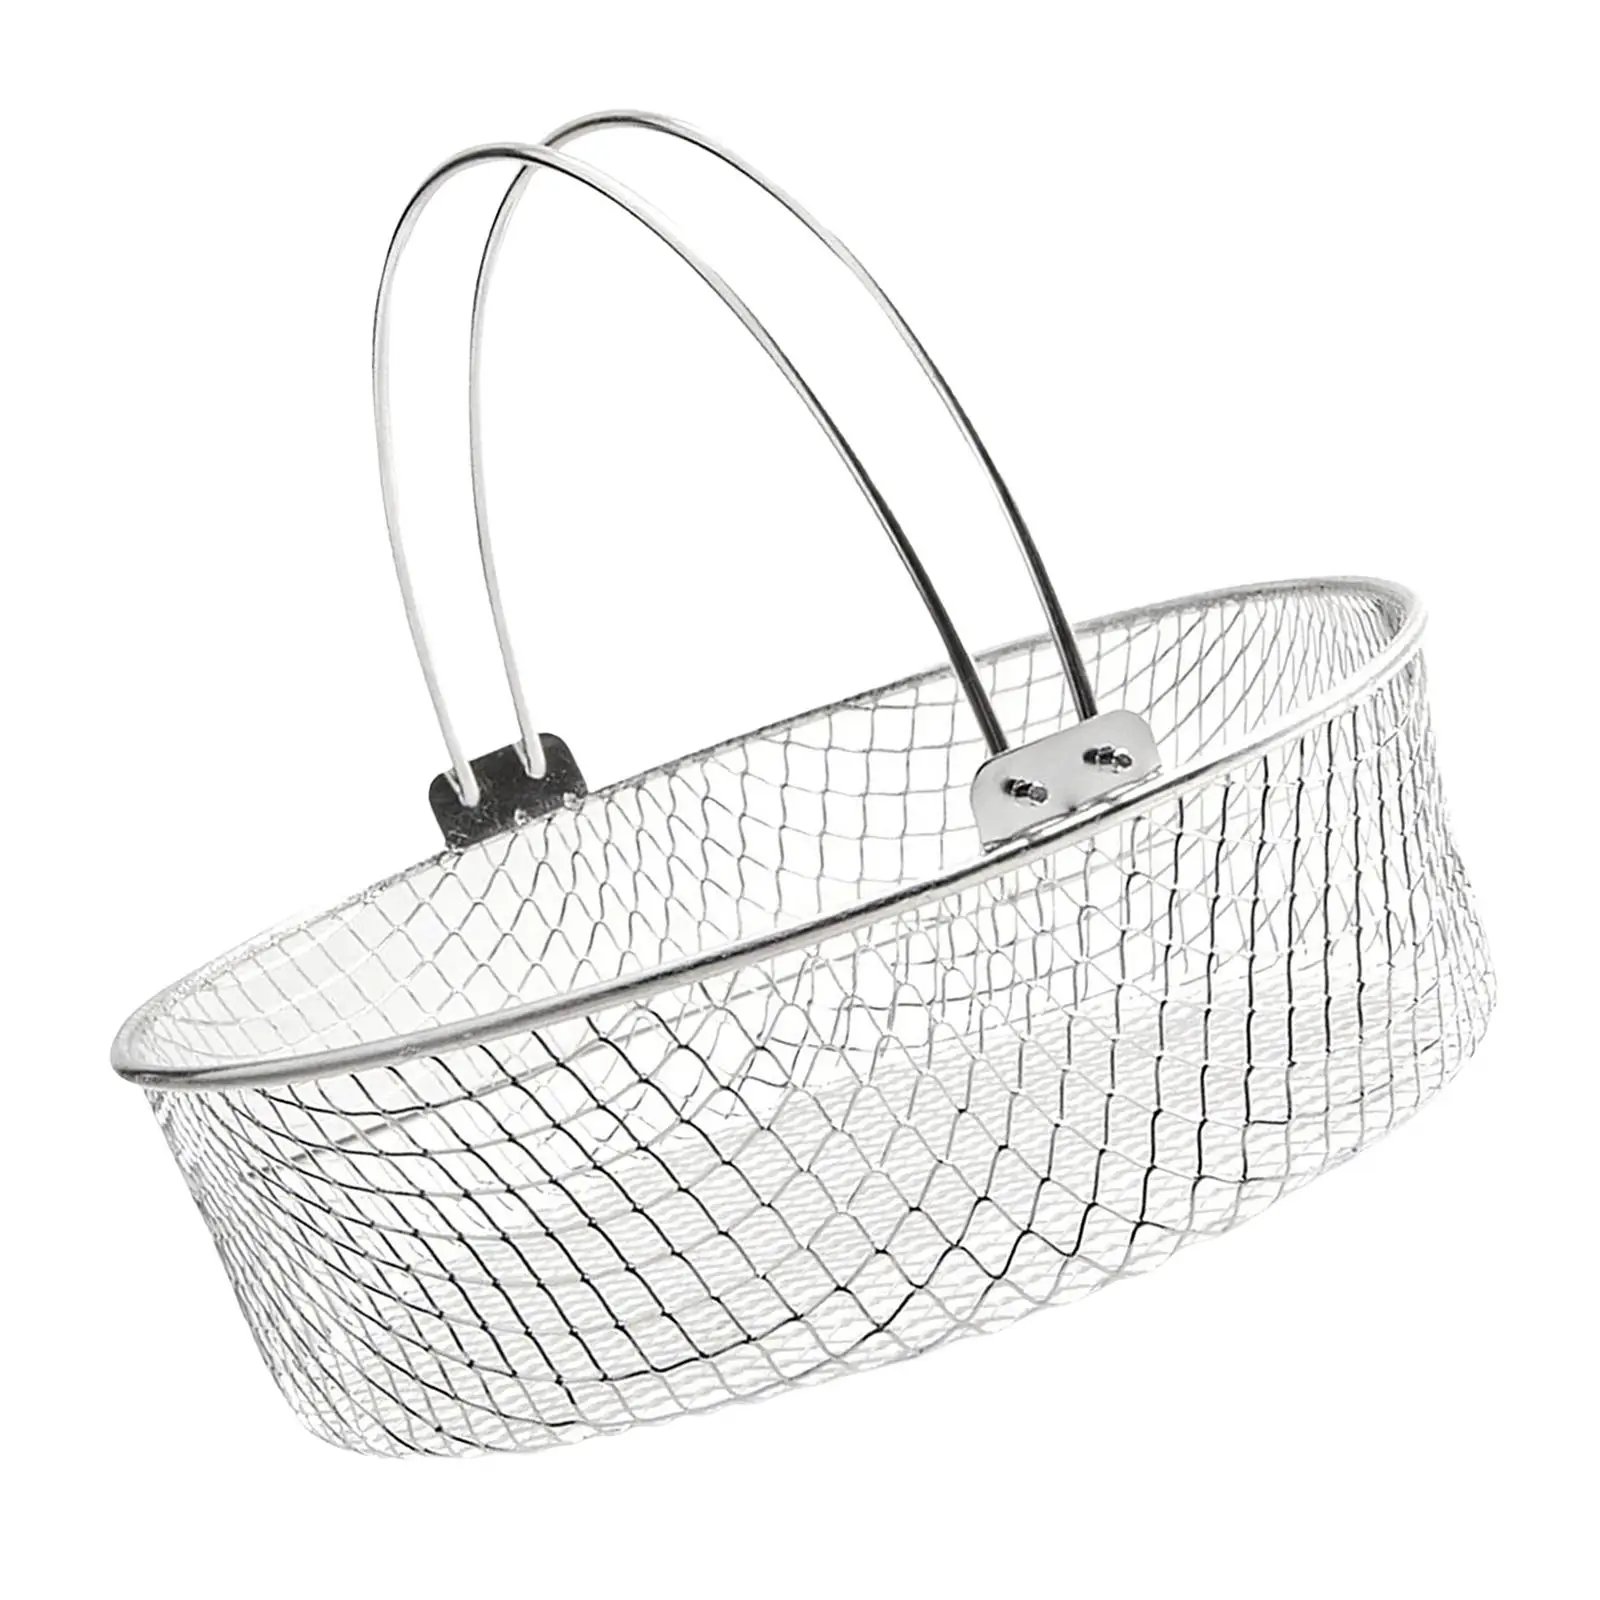  Basket W/ Handle Liners Strainer Colander Insert Accessories  Tools Deep Fry Mesh Basket for French Fries Meats Grilling